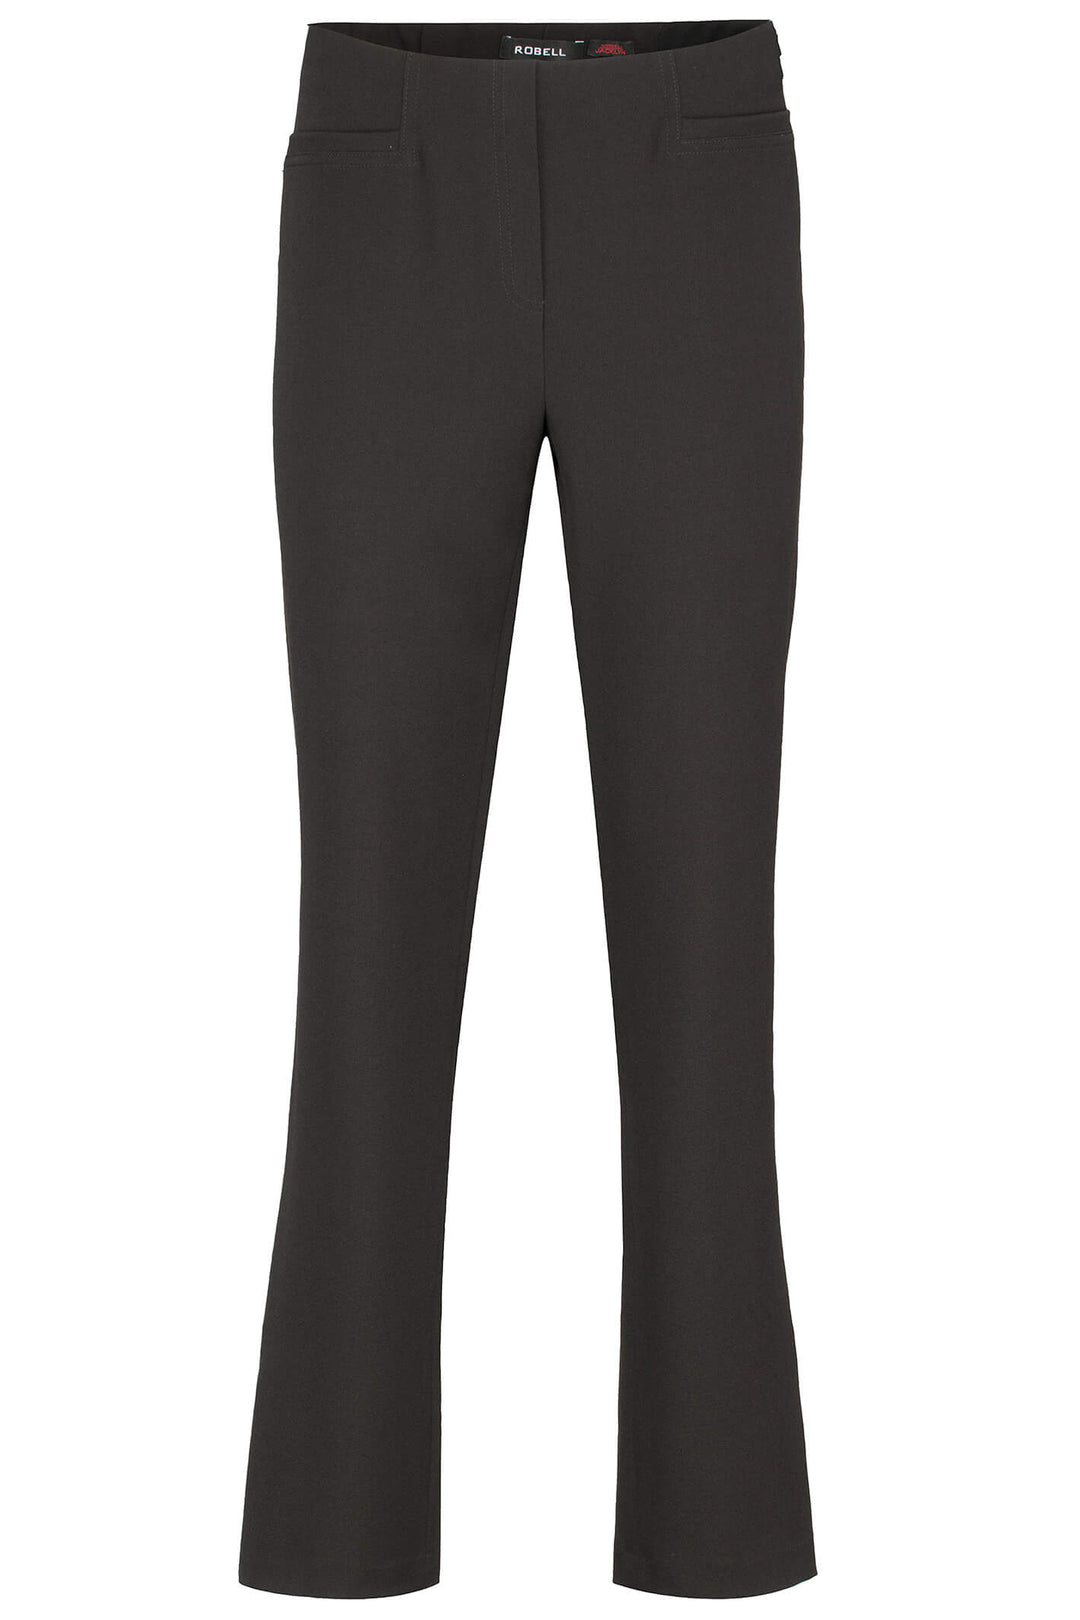 Robell 51408 90 Black Jacklyn Woven Stretch Trousers - Experience Boutique